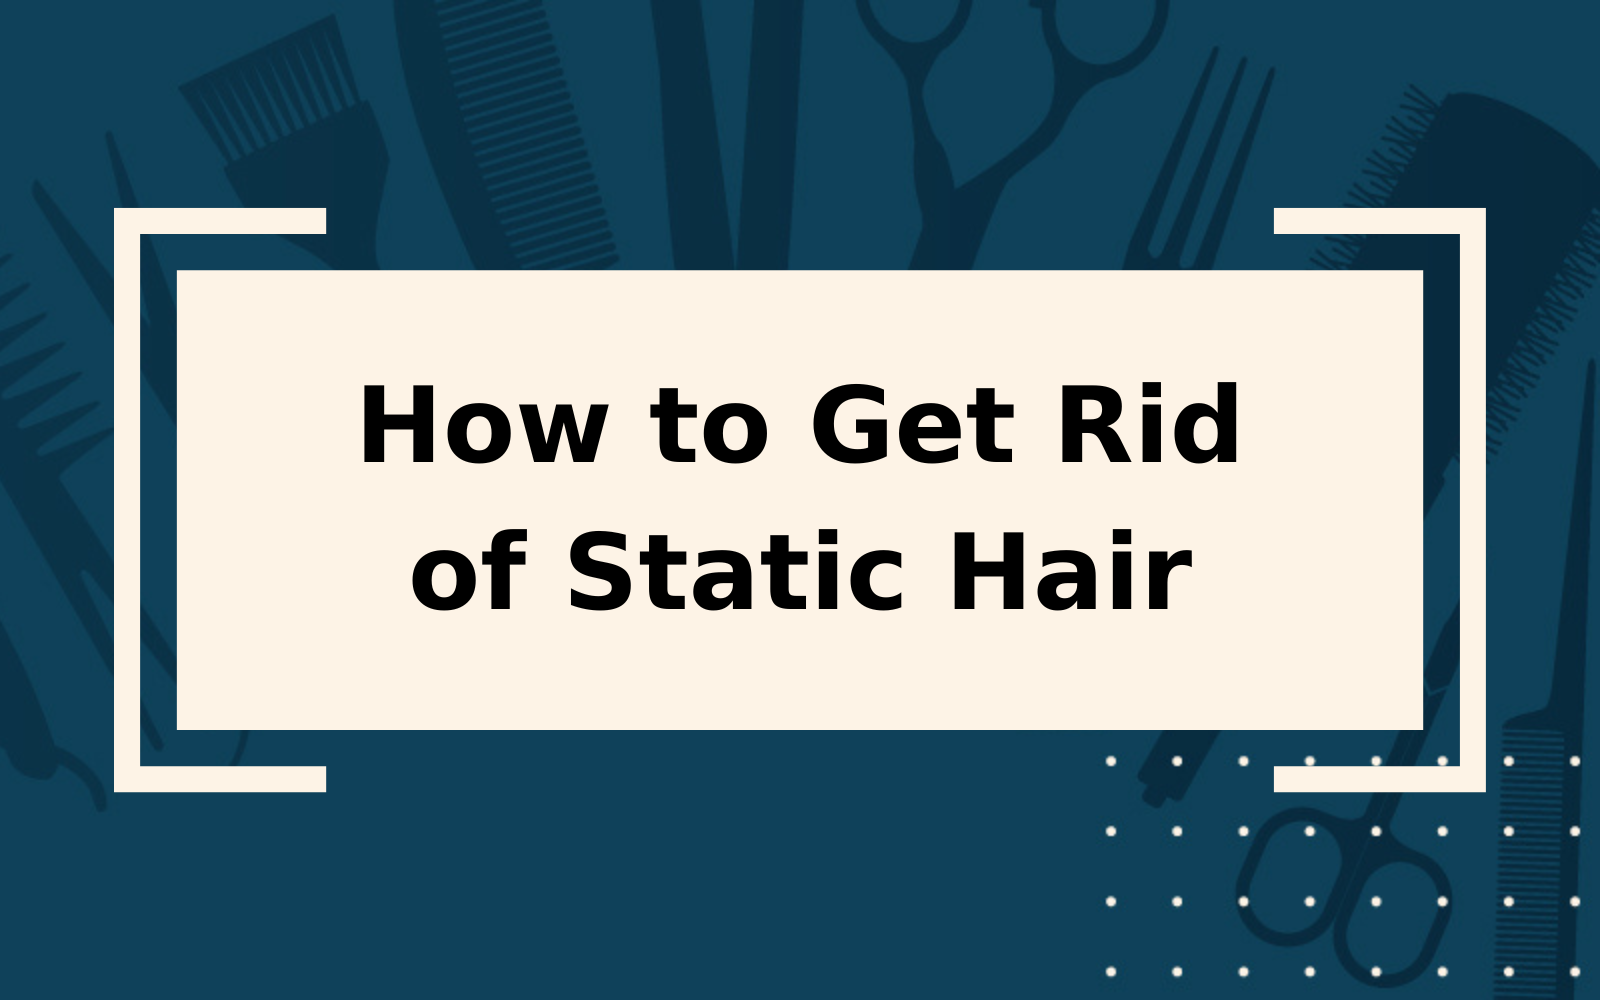 How to Get Rid of Static Hair | All You Need Is 1 Simple Solution